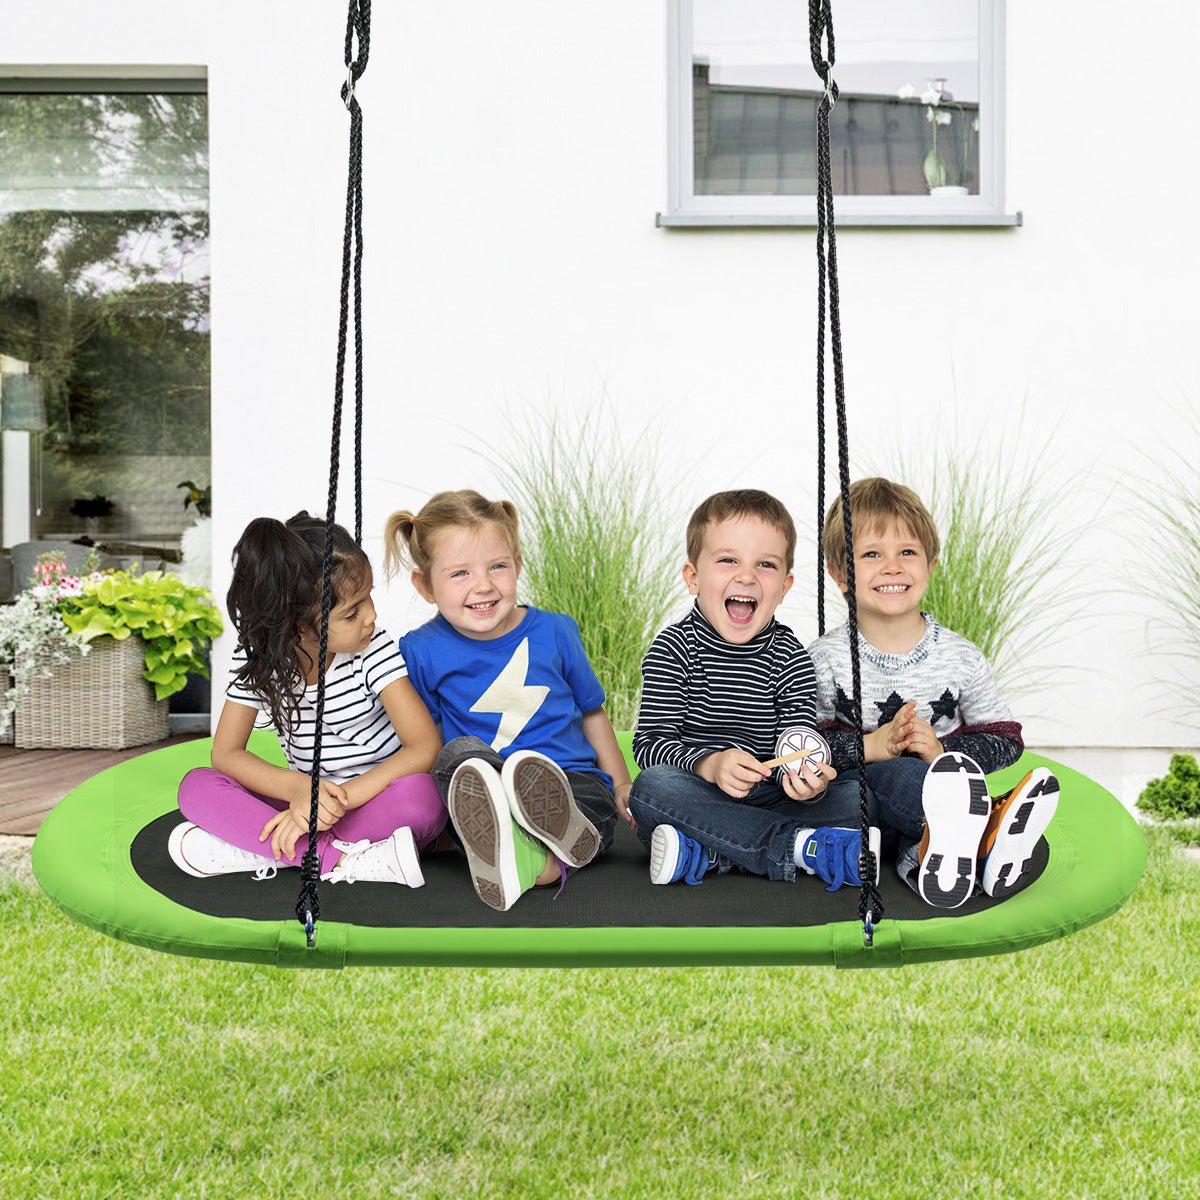 Tree Swing Set: Oval Flying Adventure with Adjustable Hanging Ropes